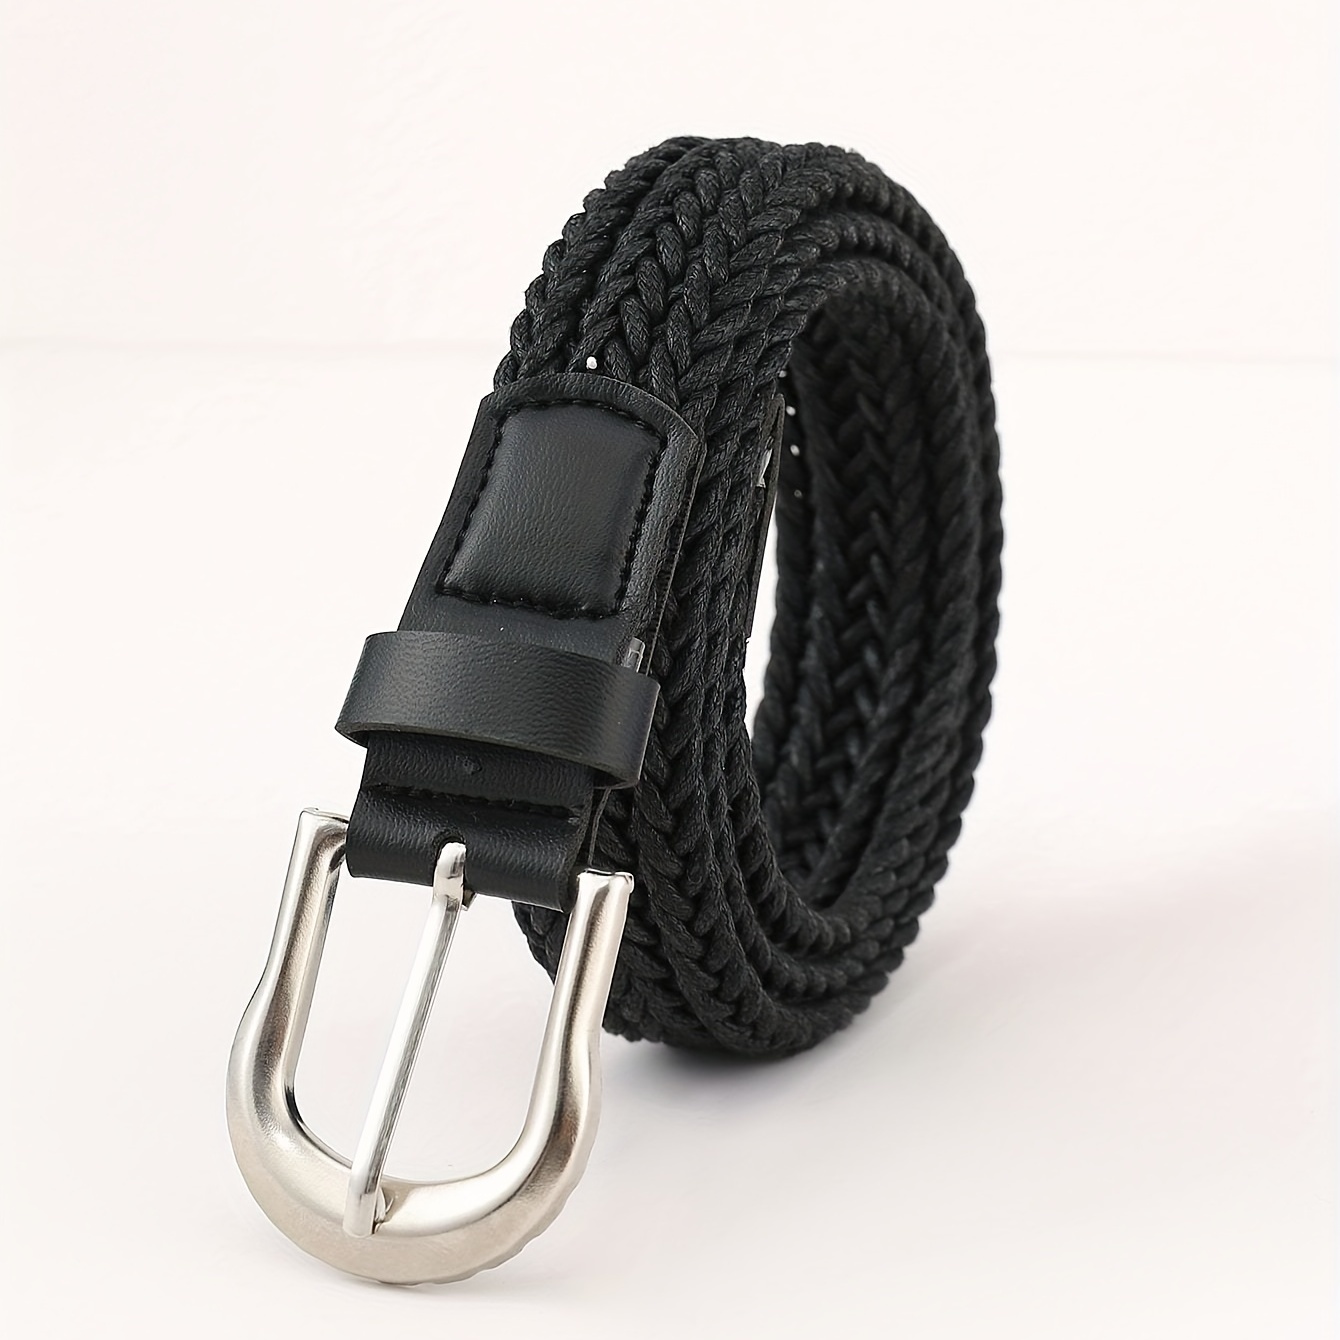 

Unisex Casual Braided Belt Simple Pin Buckle Black Waistband Classic Jeans Pants Belts For Women & Men